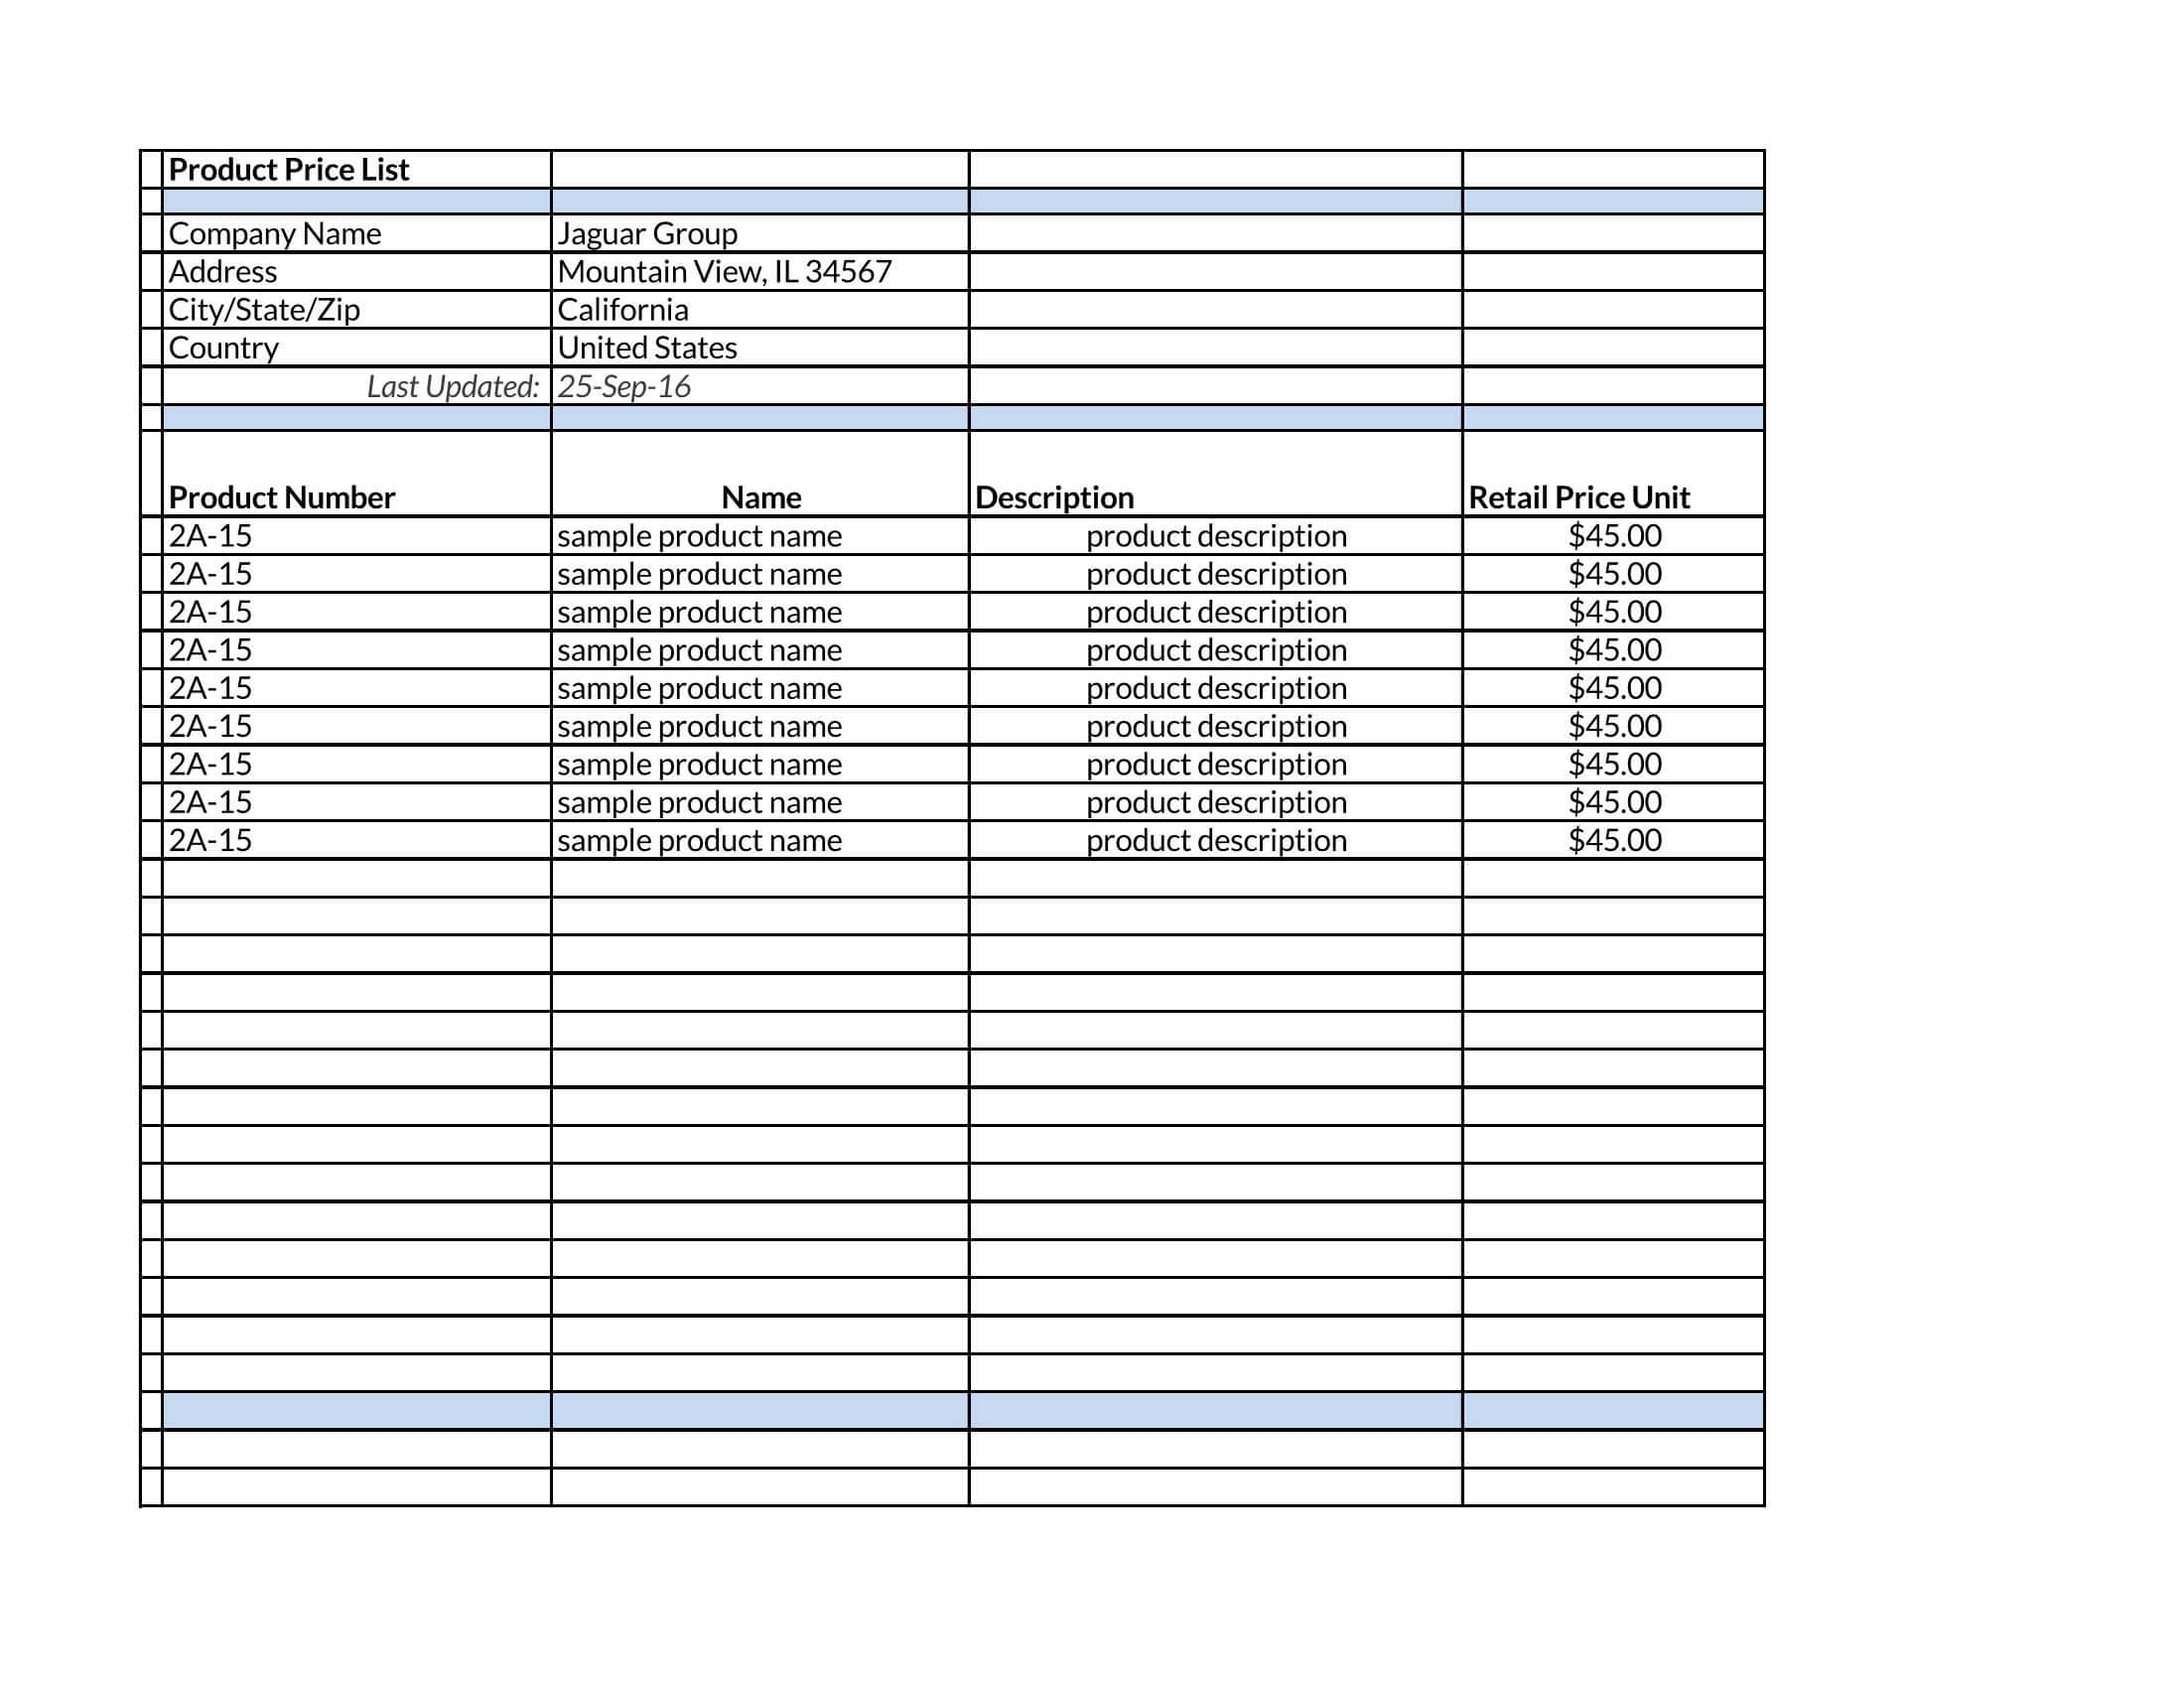 Excel price list template example